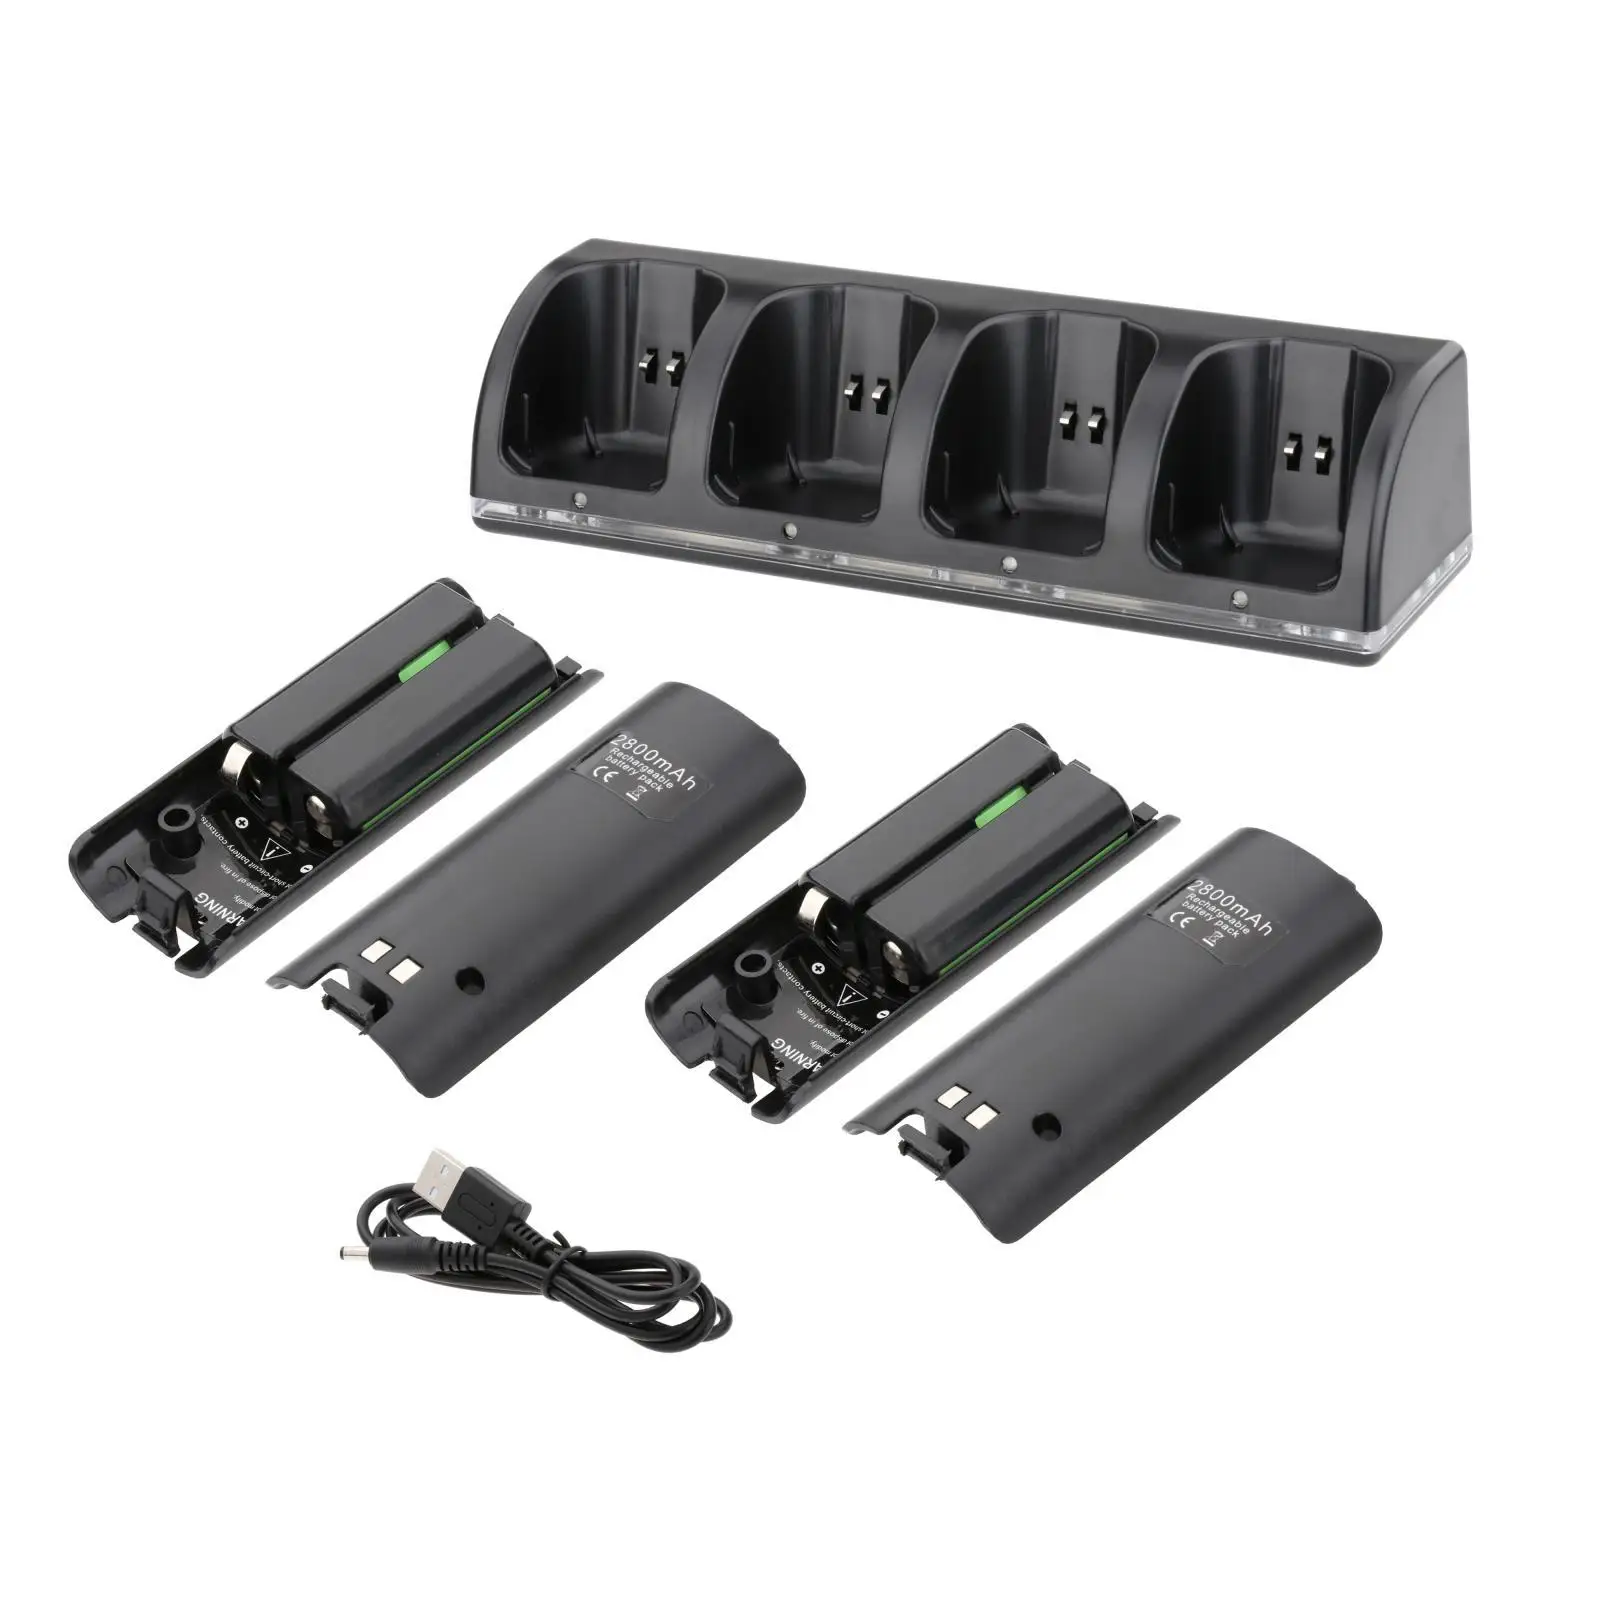  , Charging Dock Station with USB Cable 4Pcs 2800mAh Replacement Batteries for Wii Game Console Game Accessories